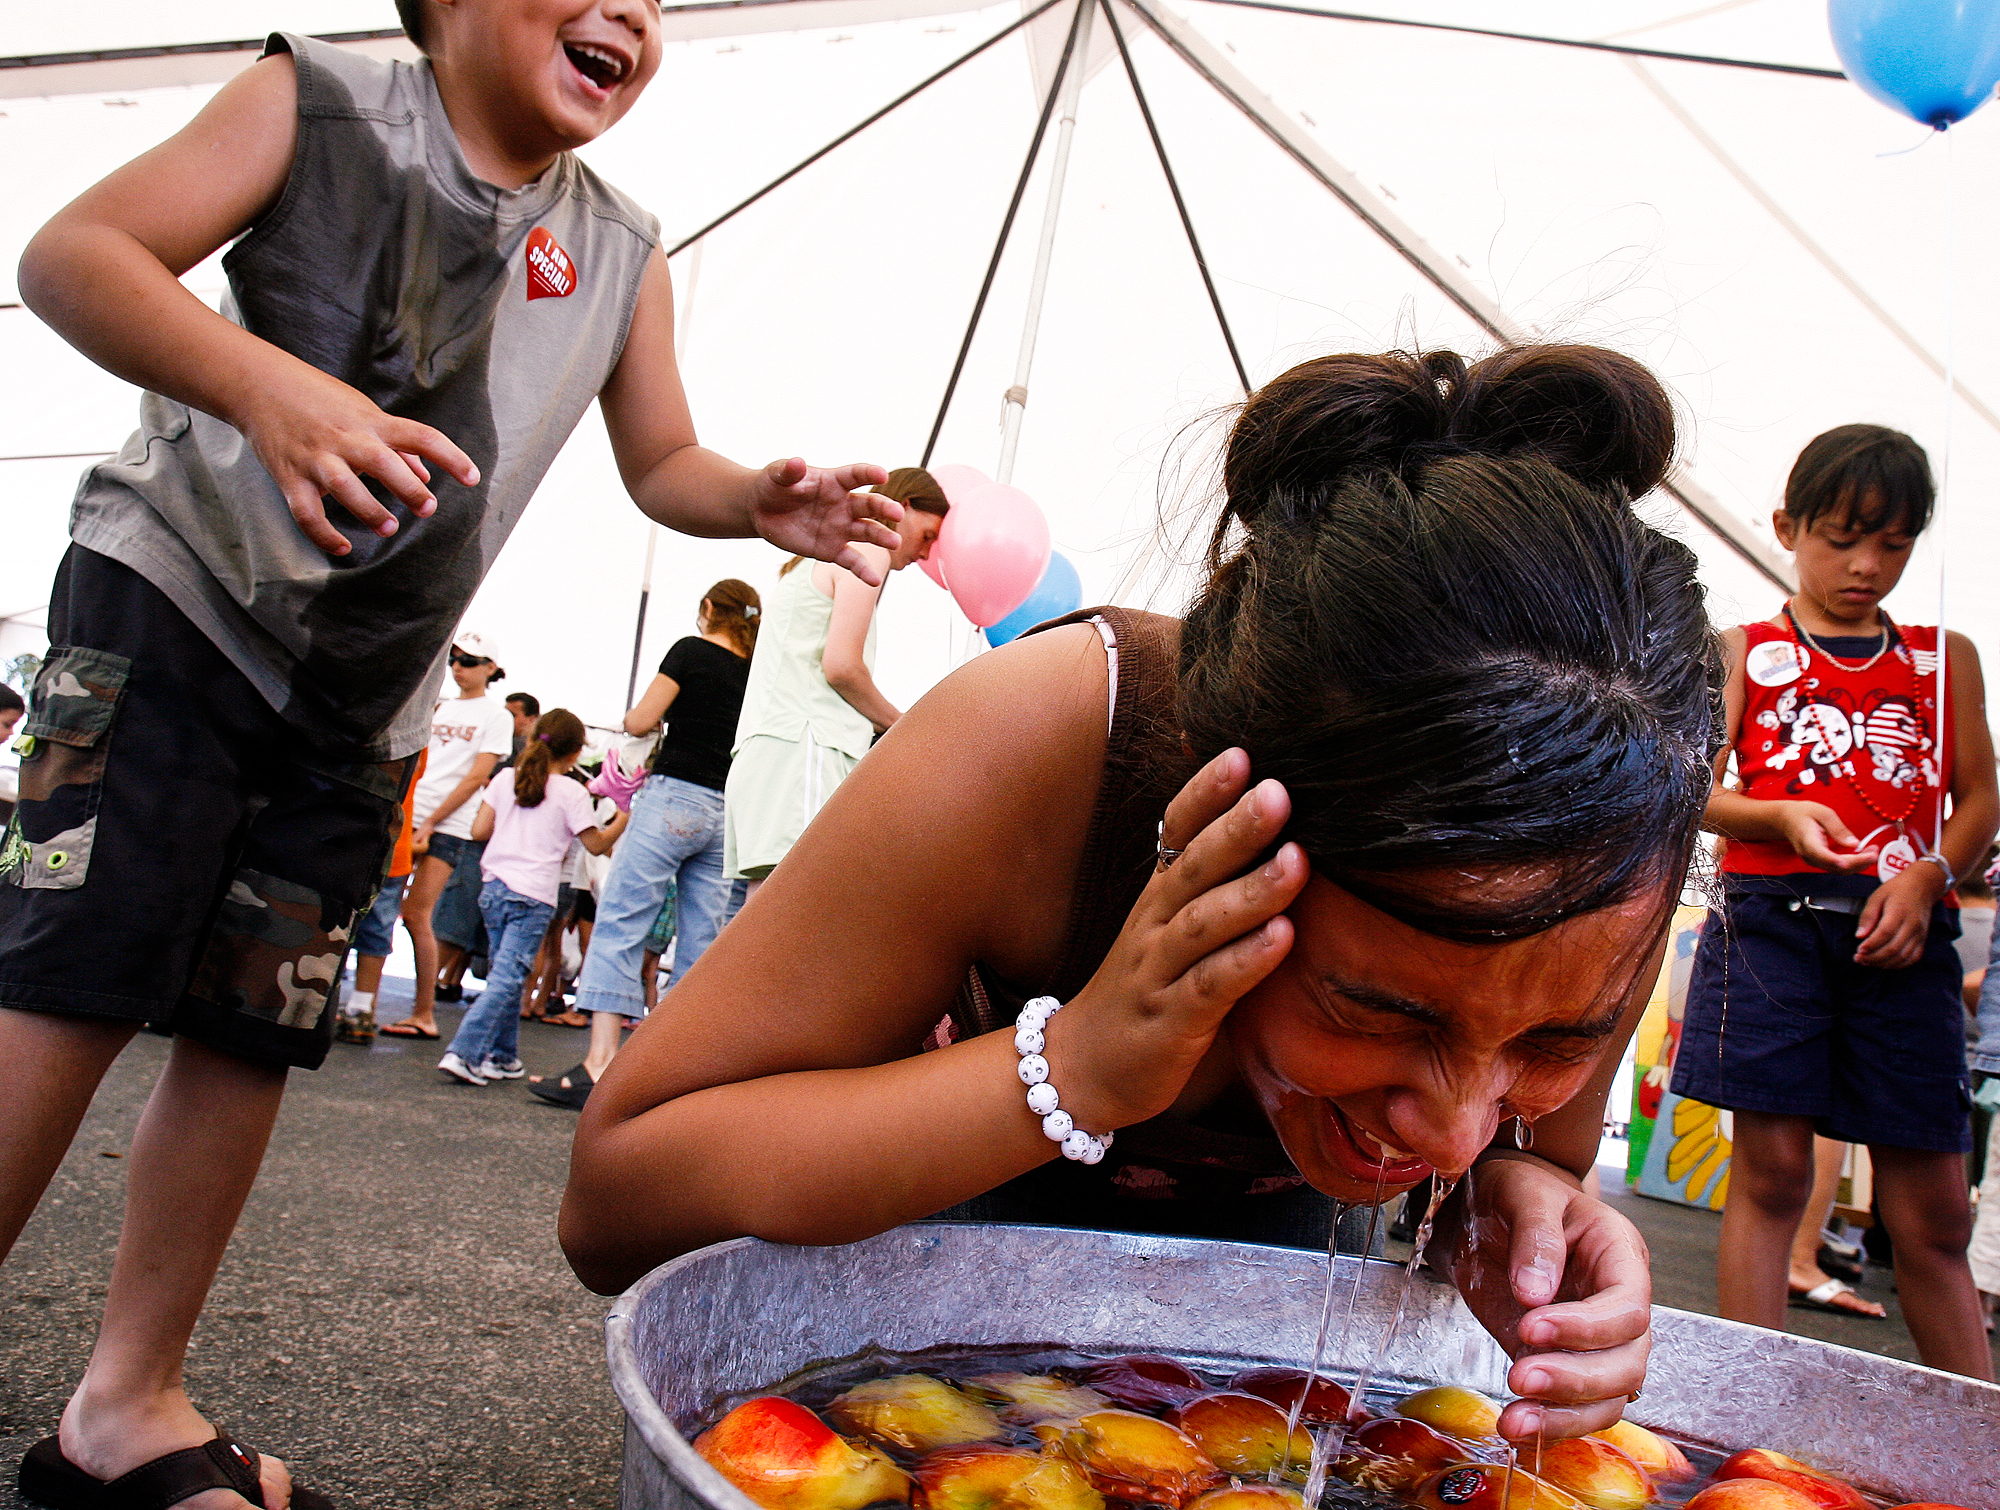  Ethan Garcia, 5, left, laughs after he executed revenge on his older sister Ariel Garcia, 11, by pushing her head into a tub of water while she bobbed for apples August, 26, 2007, in Odessa, Texas. 